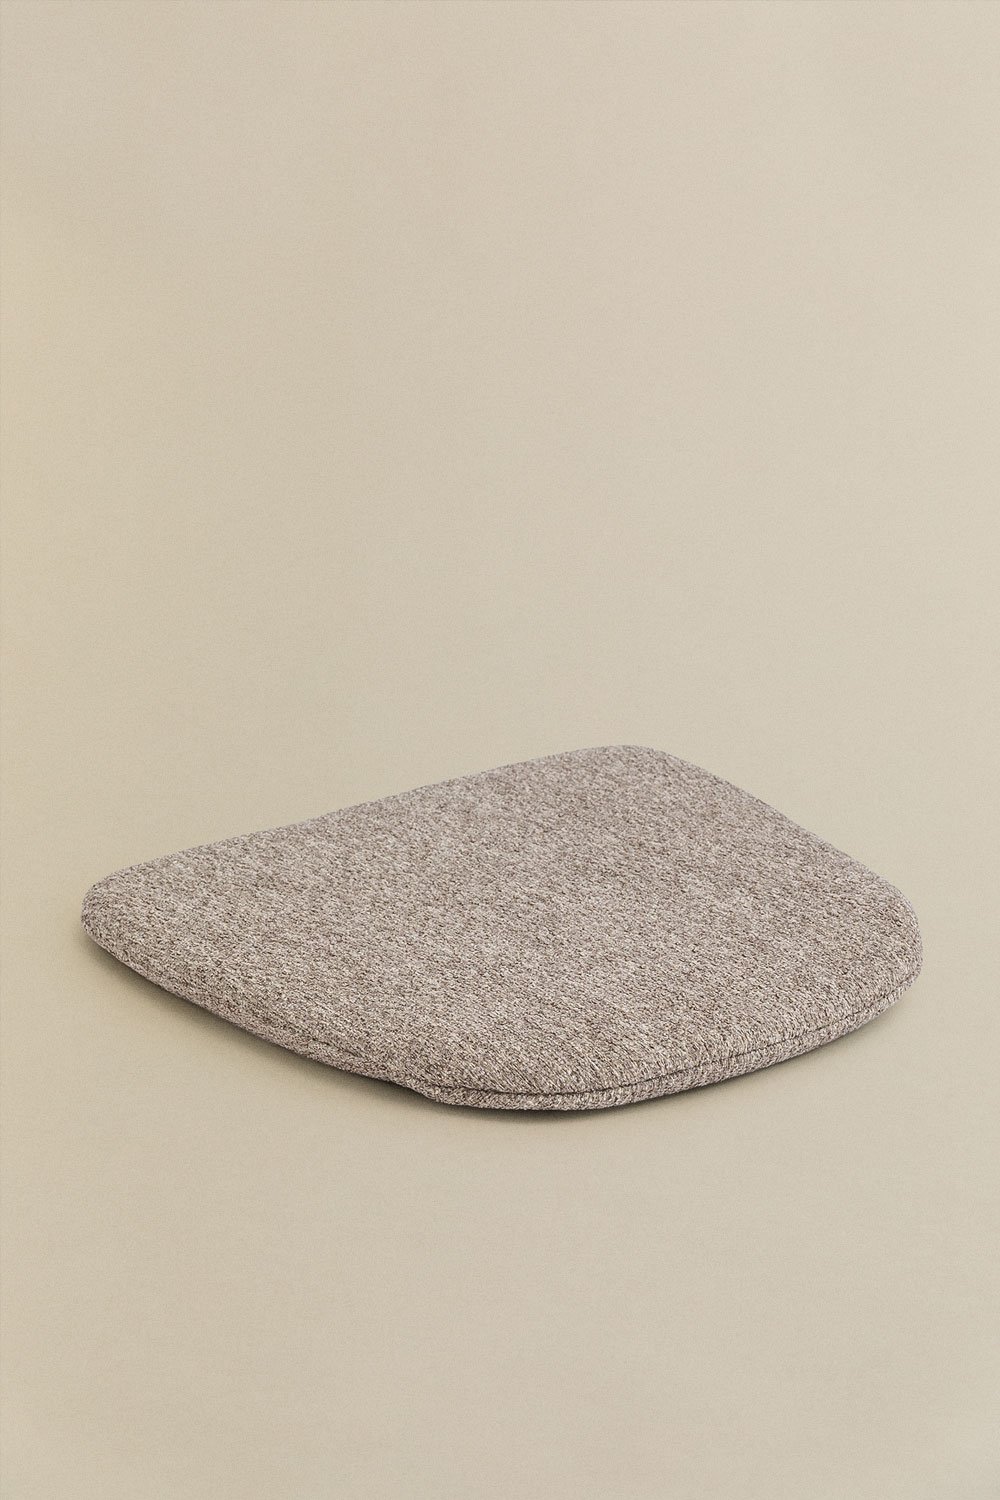 Terry cloth cushion LIX chair, gallery image 1